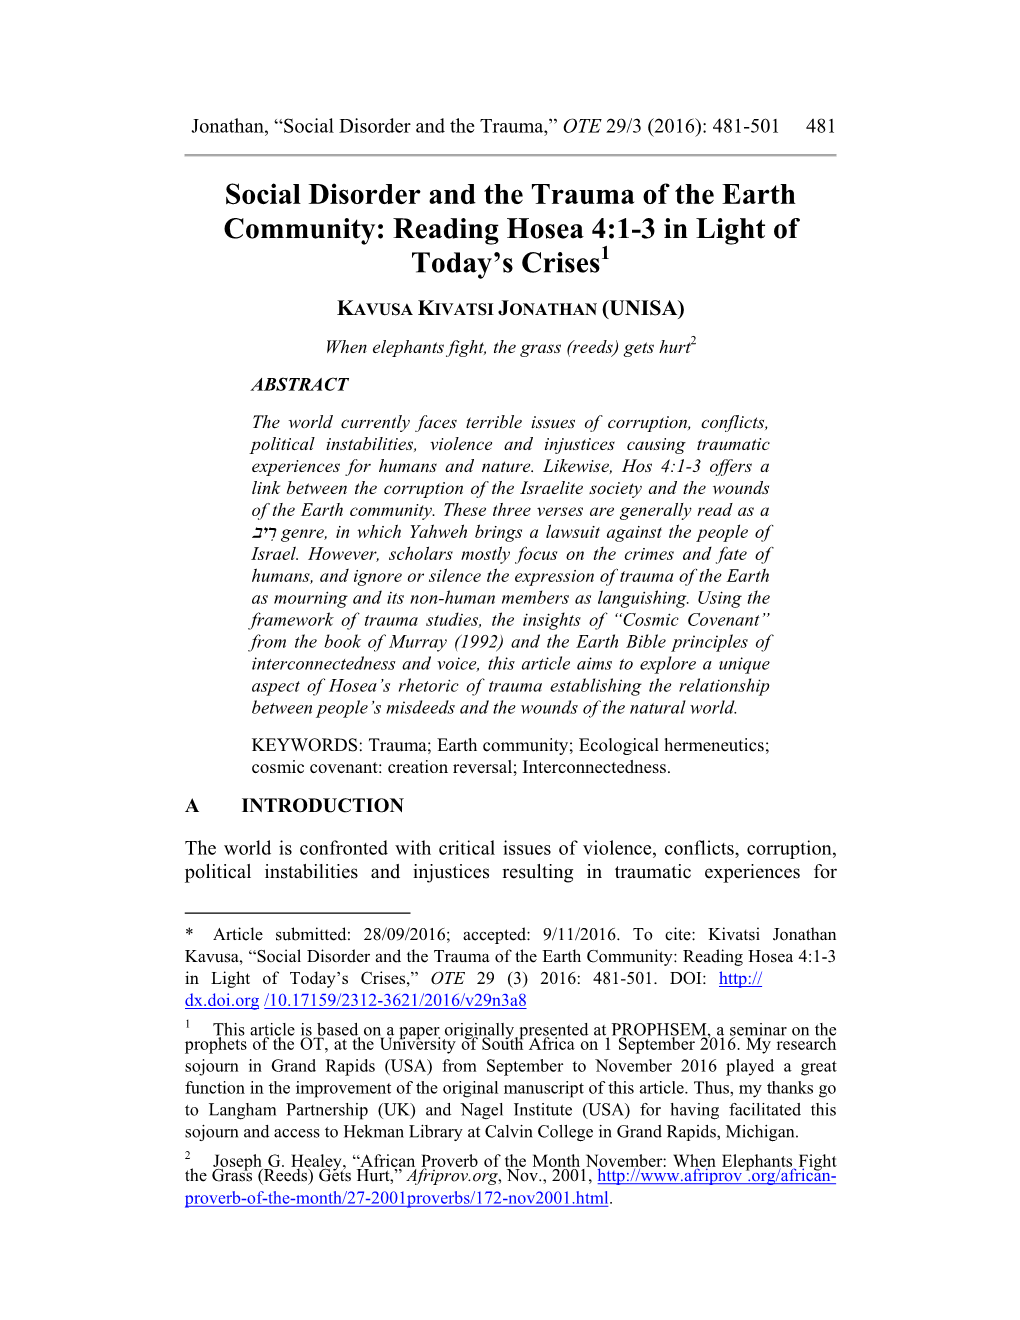 Social Disorder and the Trauma of the Earth Community: Reading Hosea 4:1-3 in Light of Today’S Crises1